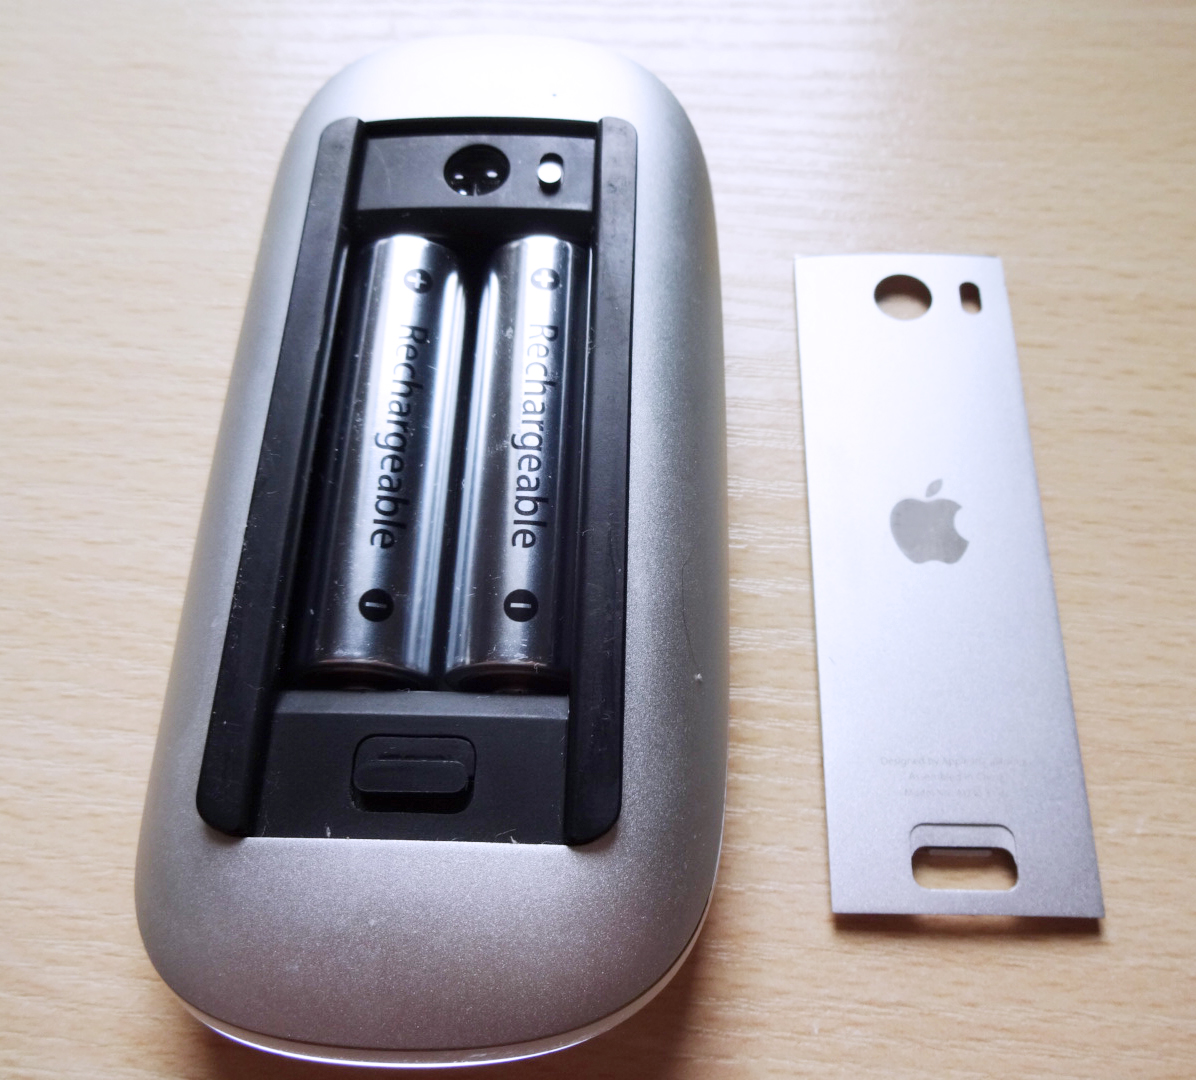 Apple mouse and battery.